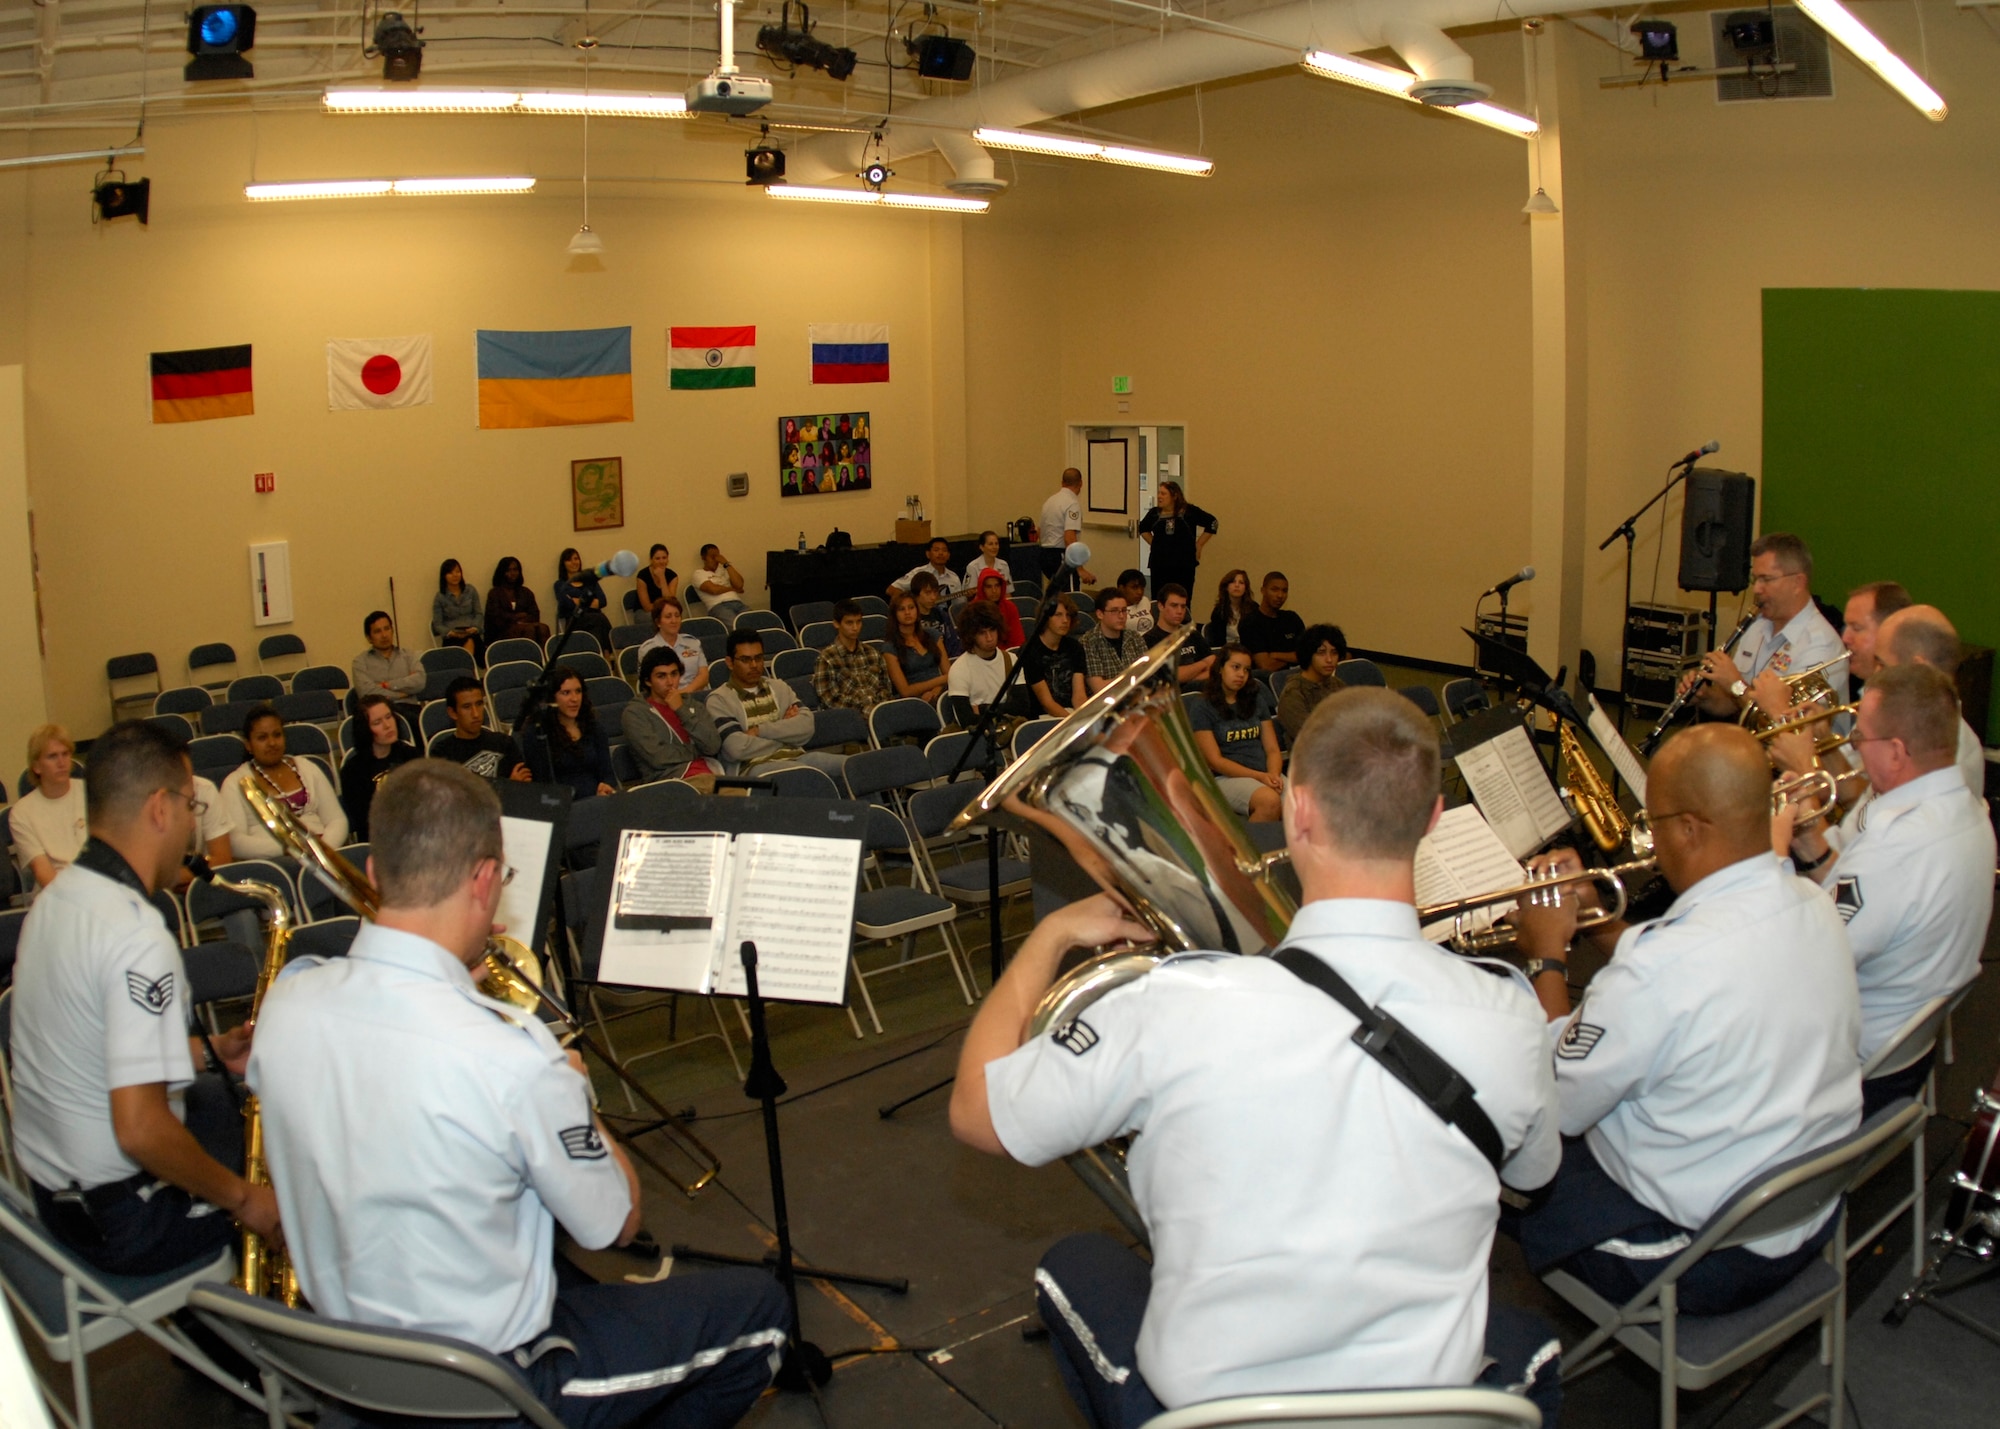 The Air National Guard Band of the Southwest performs for students at Vista Mar School in El Segundo, Calif., as part of the many events taking place during Air Force Week, Nov. 17, 2008. Air Force Week serves as the premier platform to share the Air Force story with our fellow citizens. Air Force Week includes community visits and talks by Air Force officials, flight demonstrations and displays providing an up close and personal look at the men and women of the Air Force serving worldwide in defense of freedom. (U.S. Air Force photo by Stephen D. Schester)